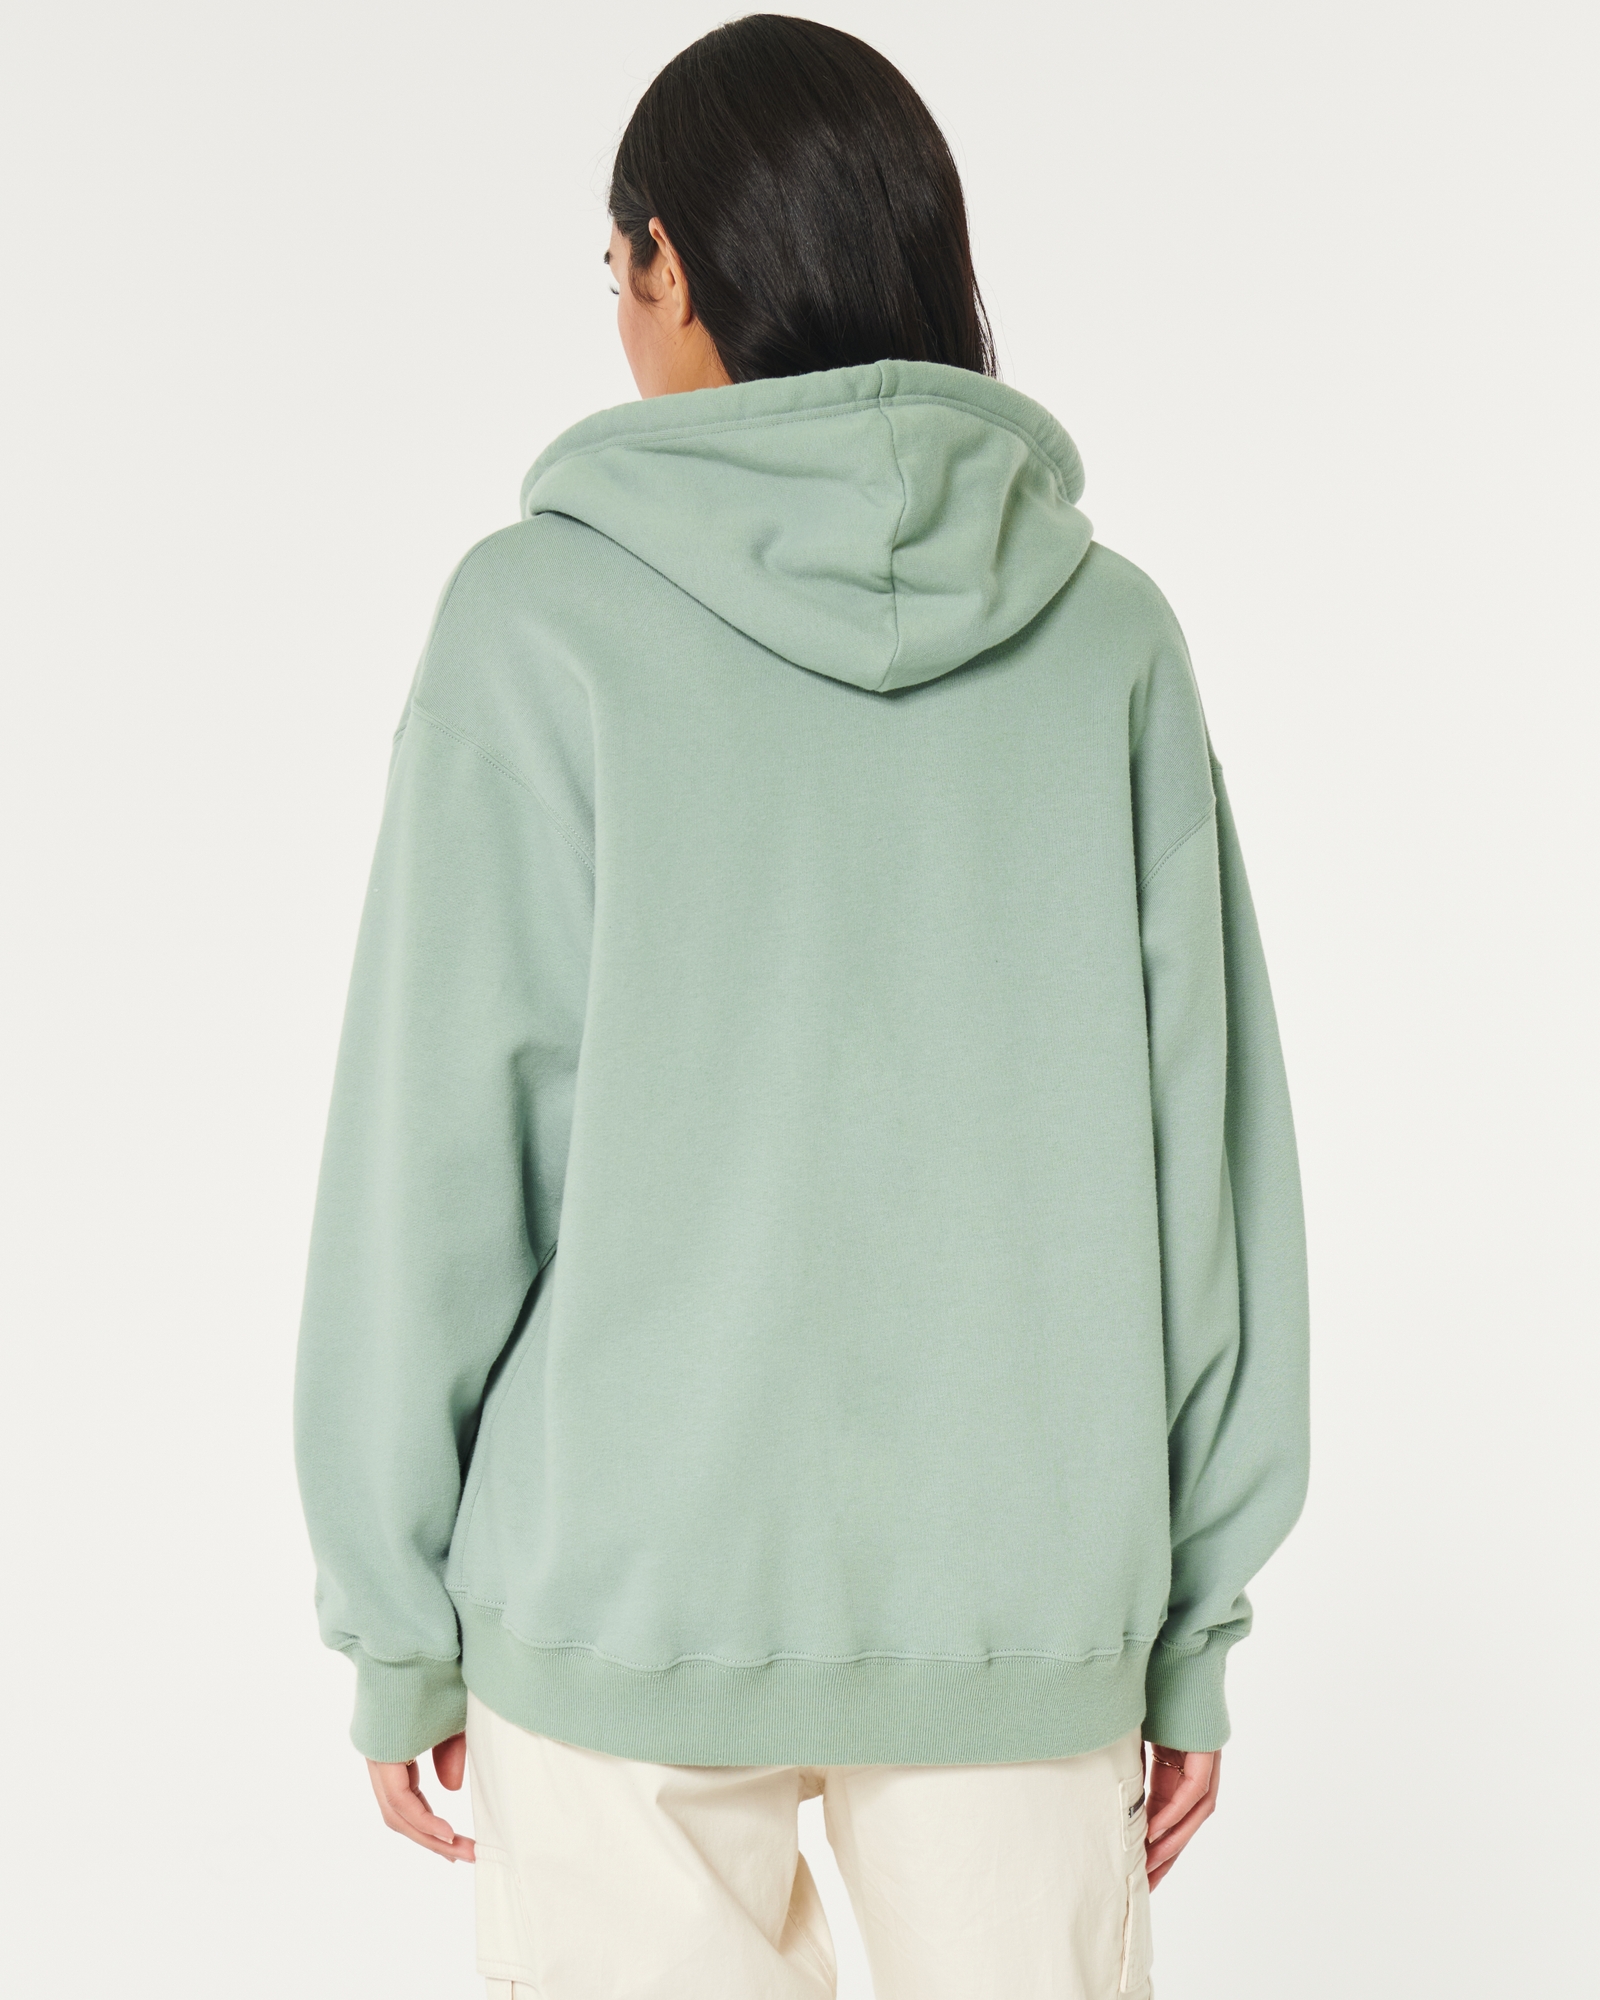 https://img.hollisterco.com/is/image/anf/KIC_352-4053-0018-320_model3.jpg?policy=product-extra-large